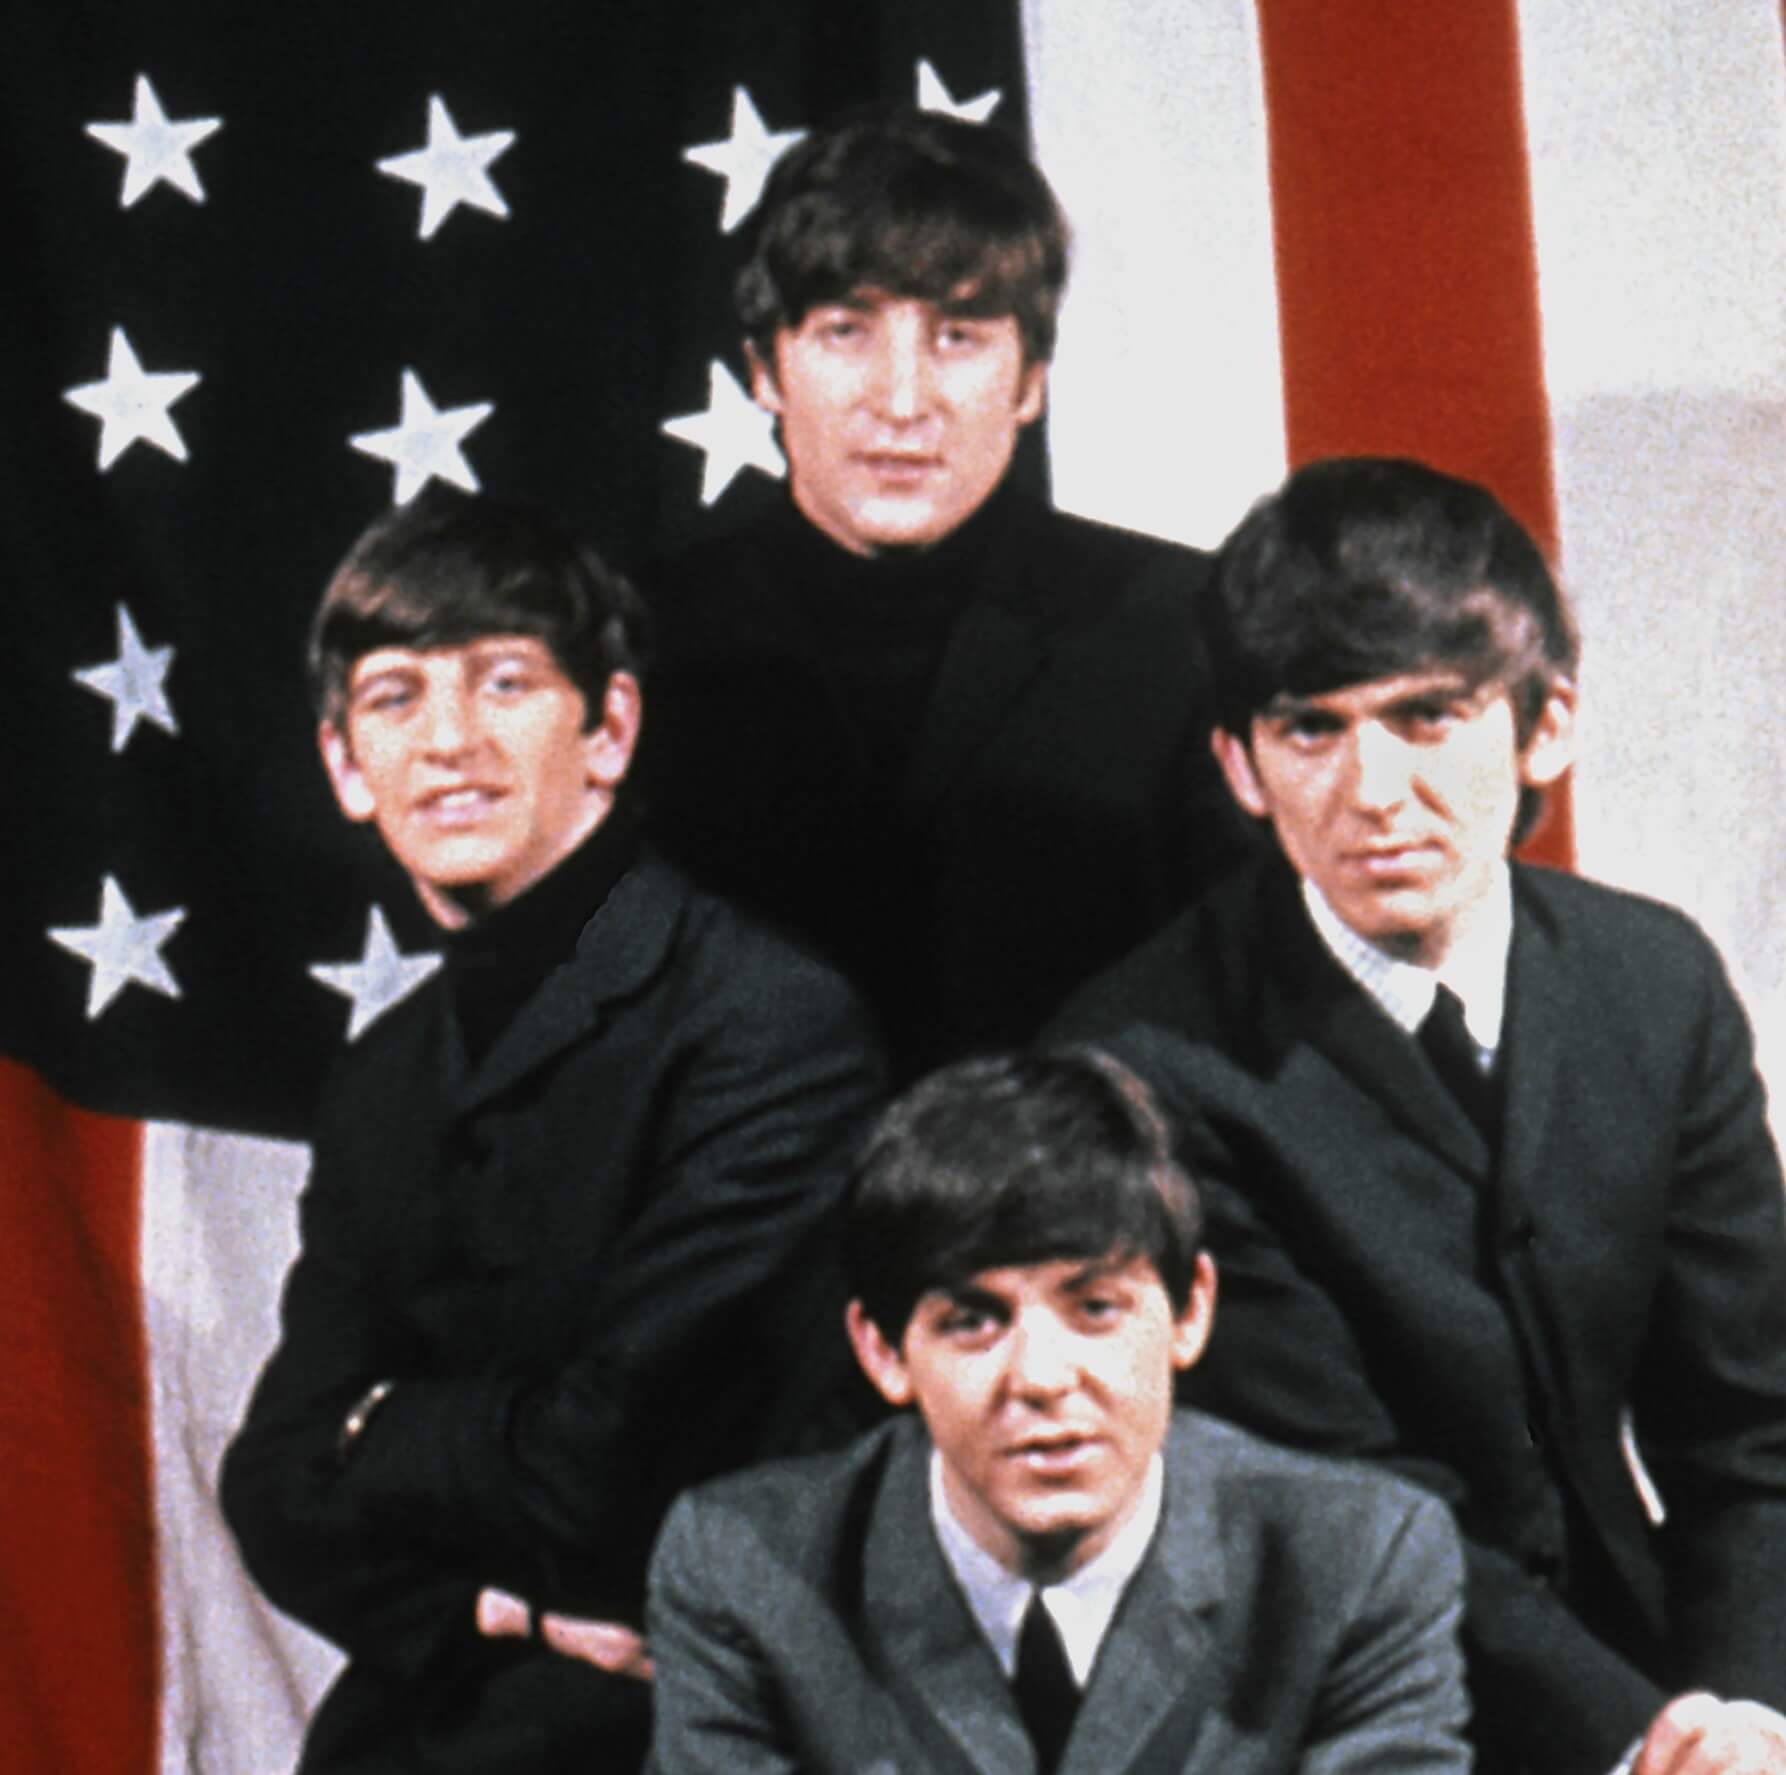 The Beatles in front of a flag